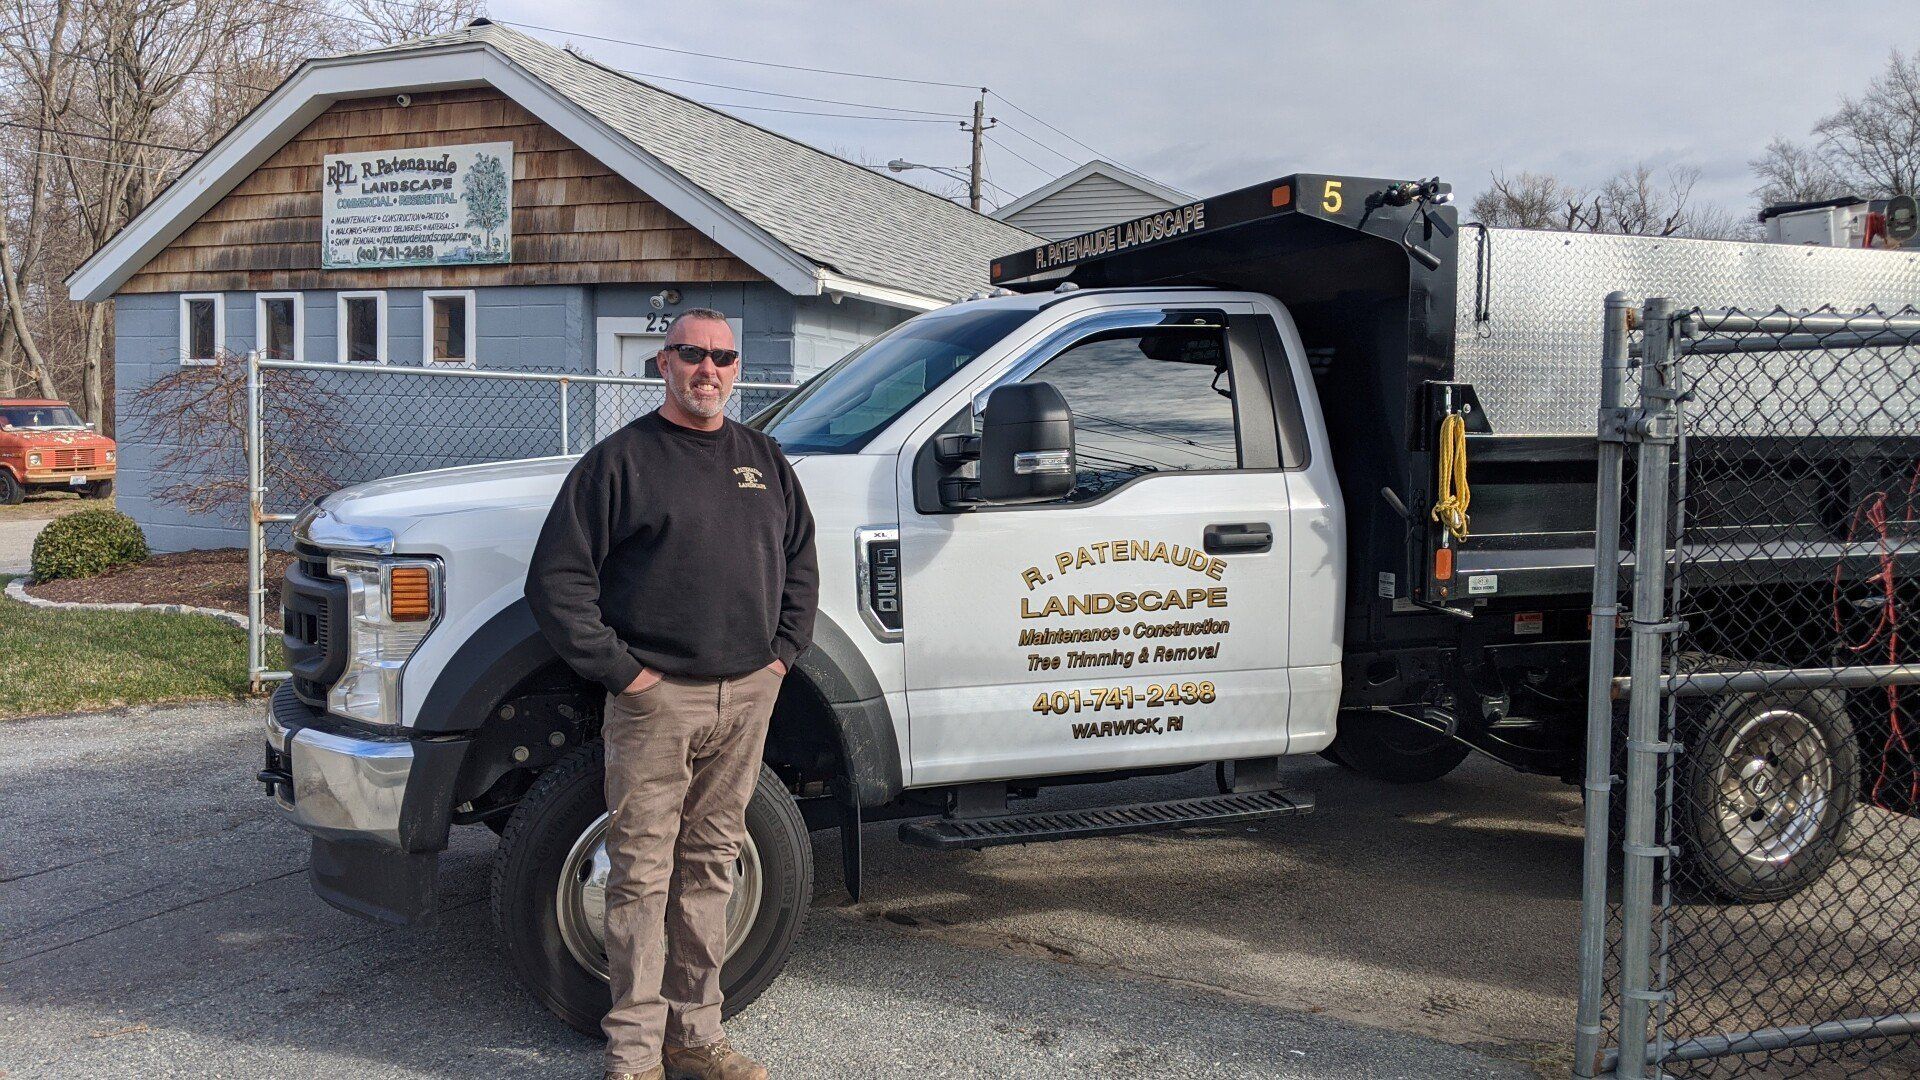 Man in from of R Patenaude Landscape LLC's truck